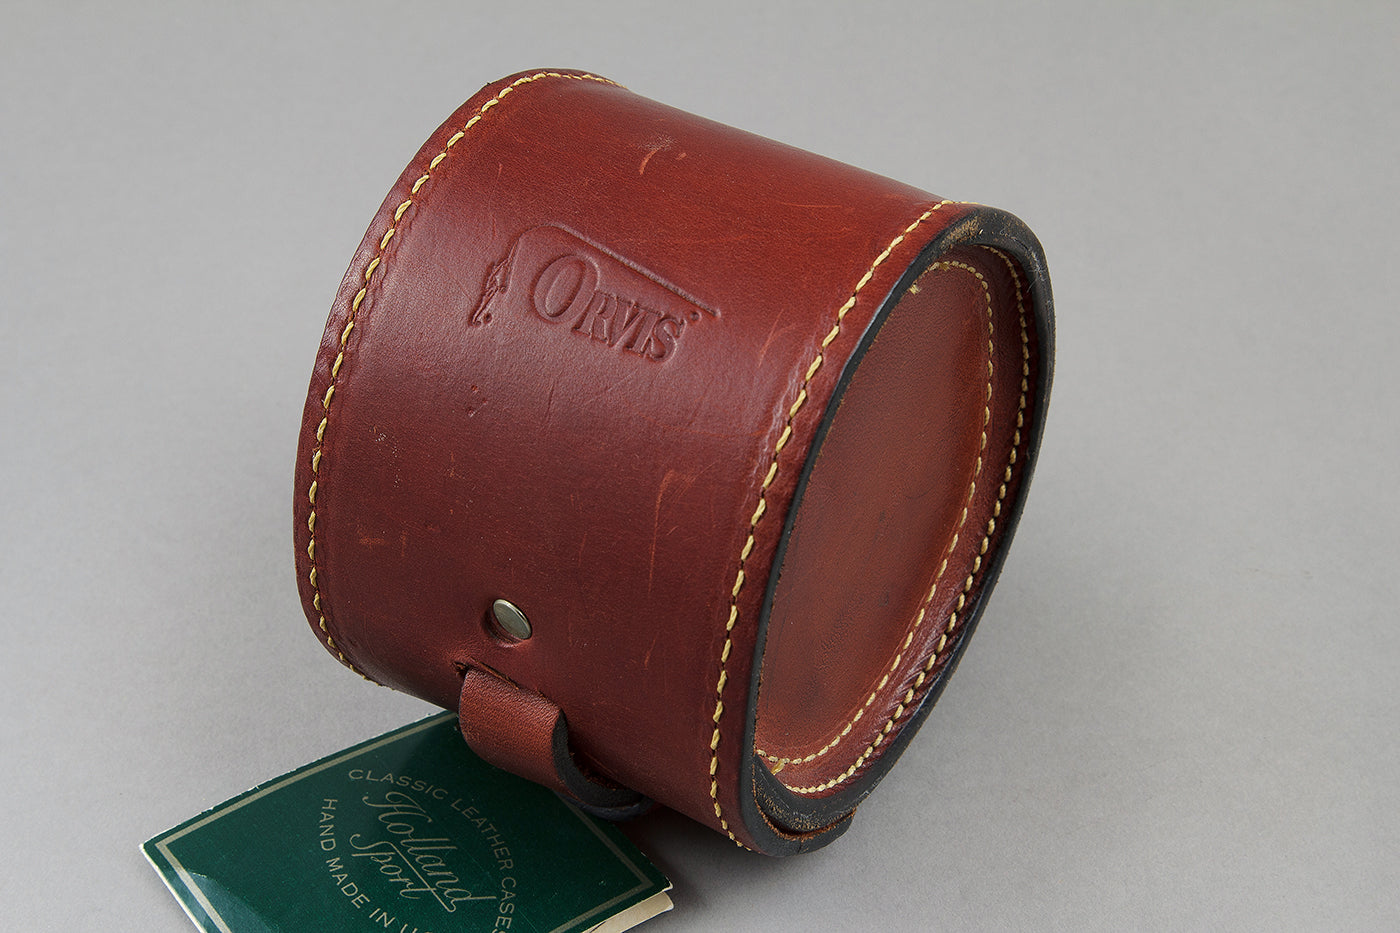 Orvis & Holland – Leather Reel Case 4